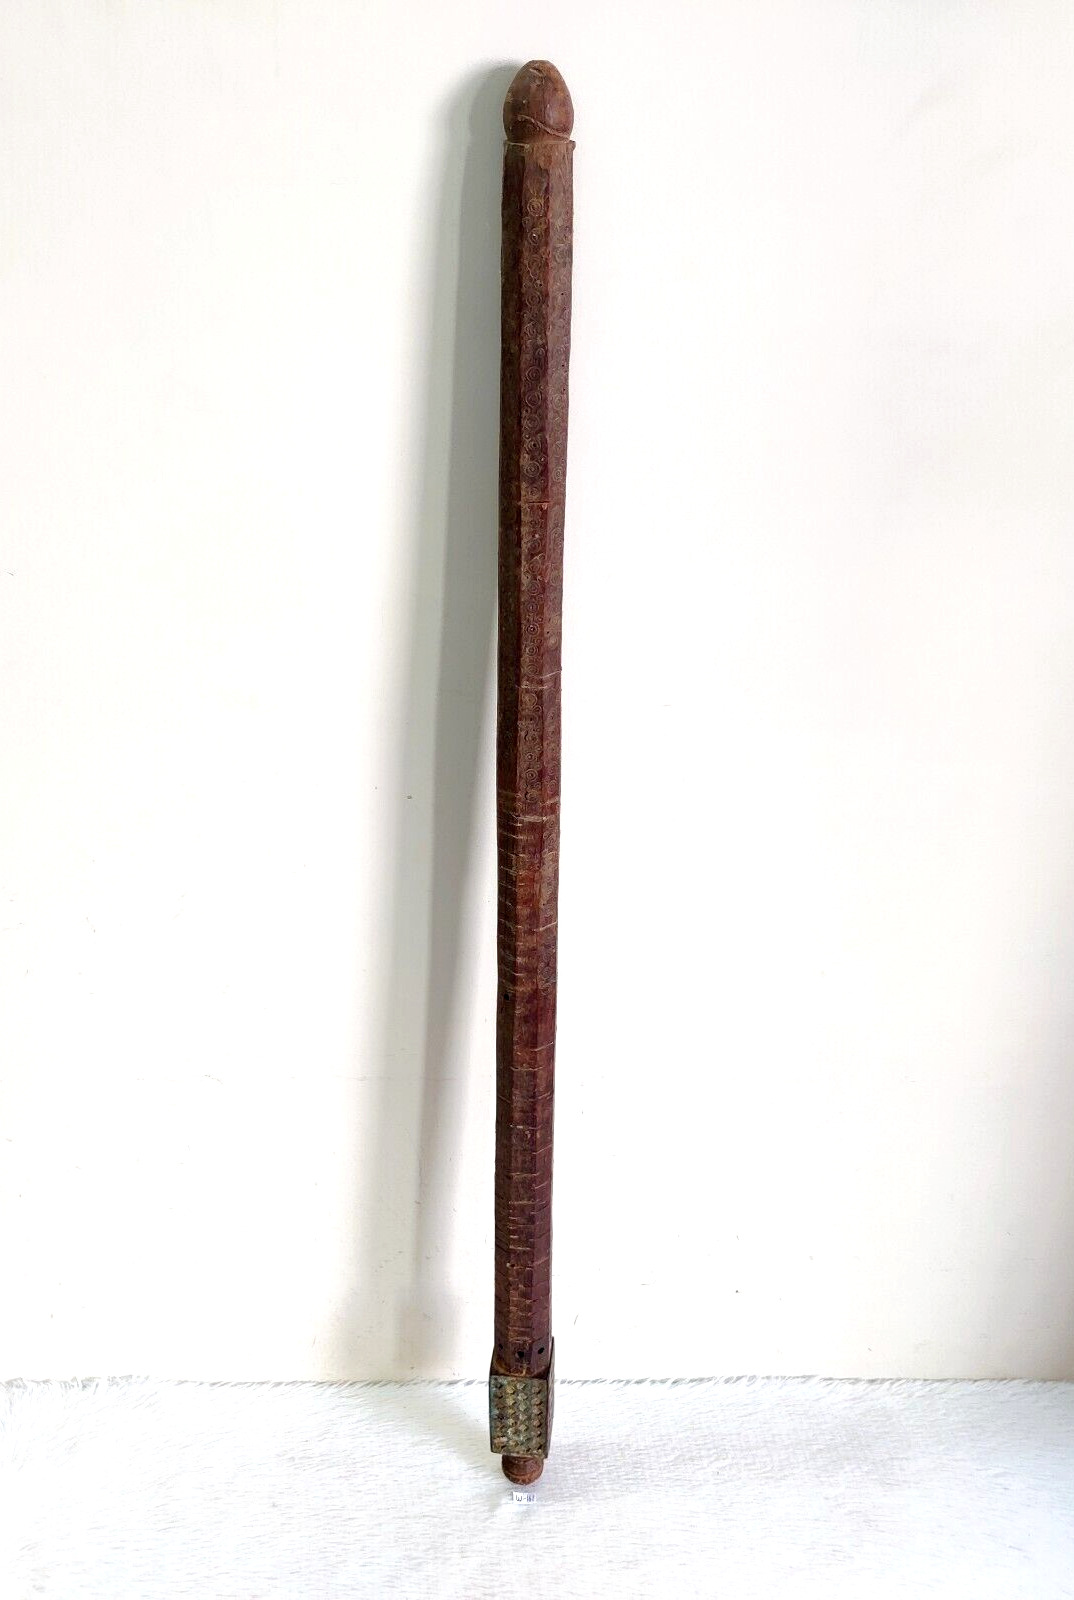 18c Vintage Original Old Brass Decorated Tantra Mantra Religious Wooden Stick